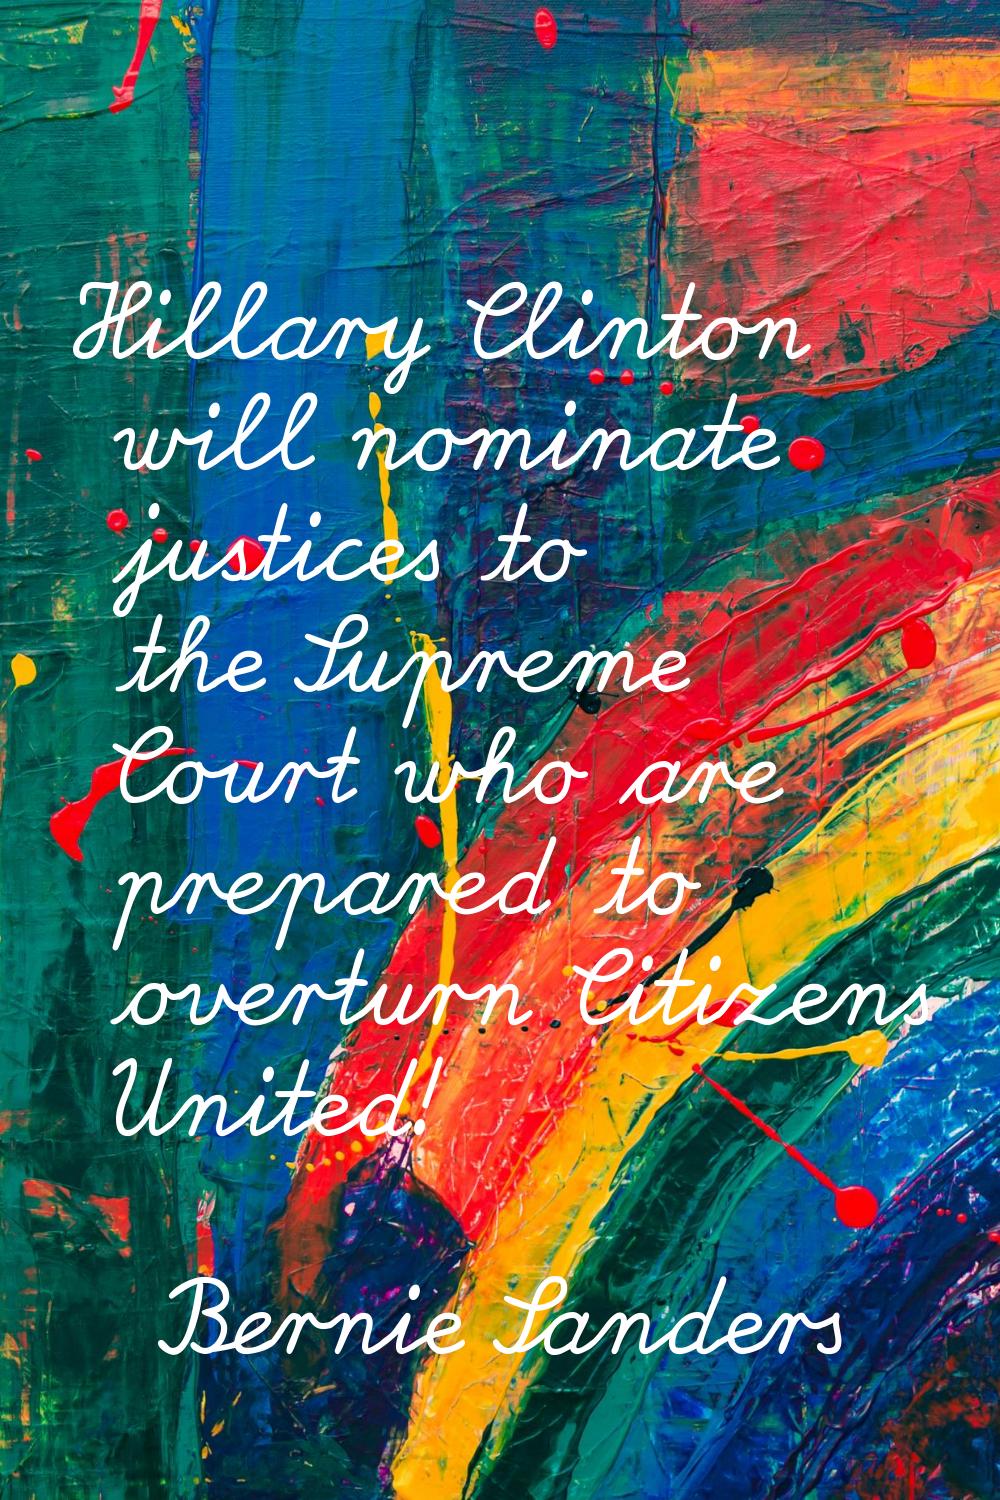 Hillary Clinton will nominate justices to the Supreme Court who are prepared to overturn Citizens U